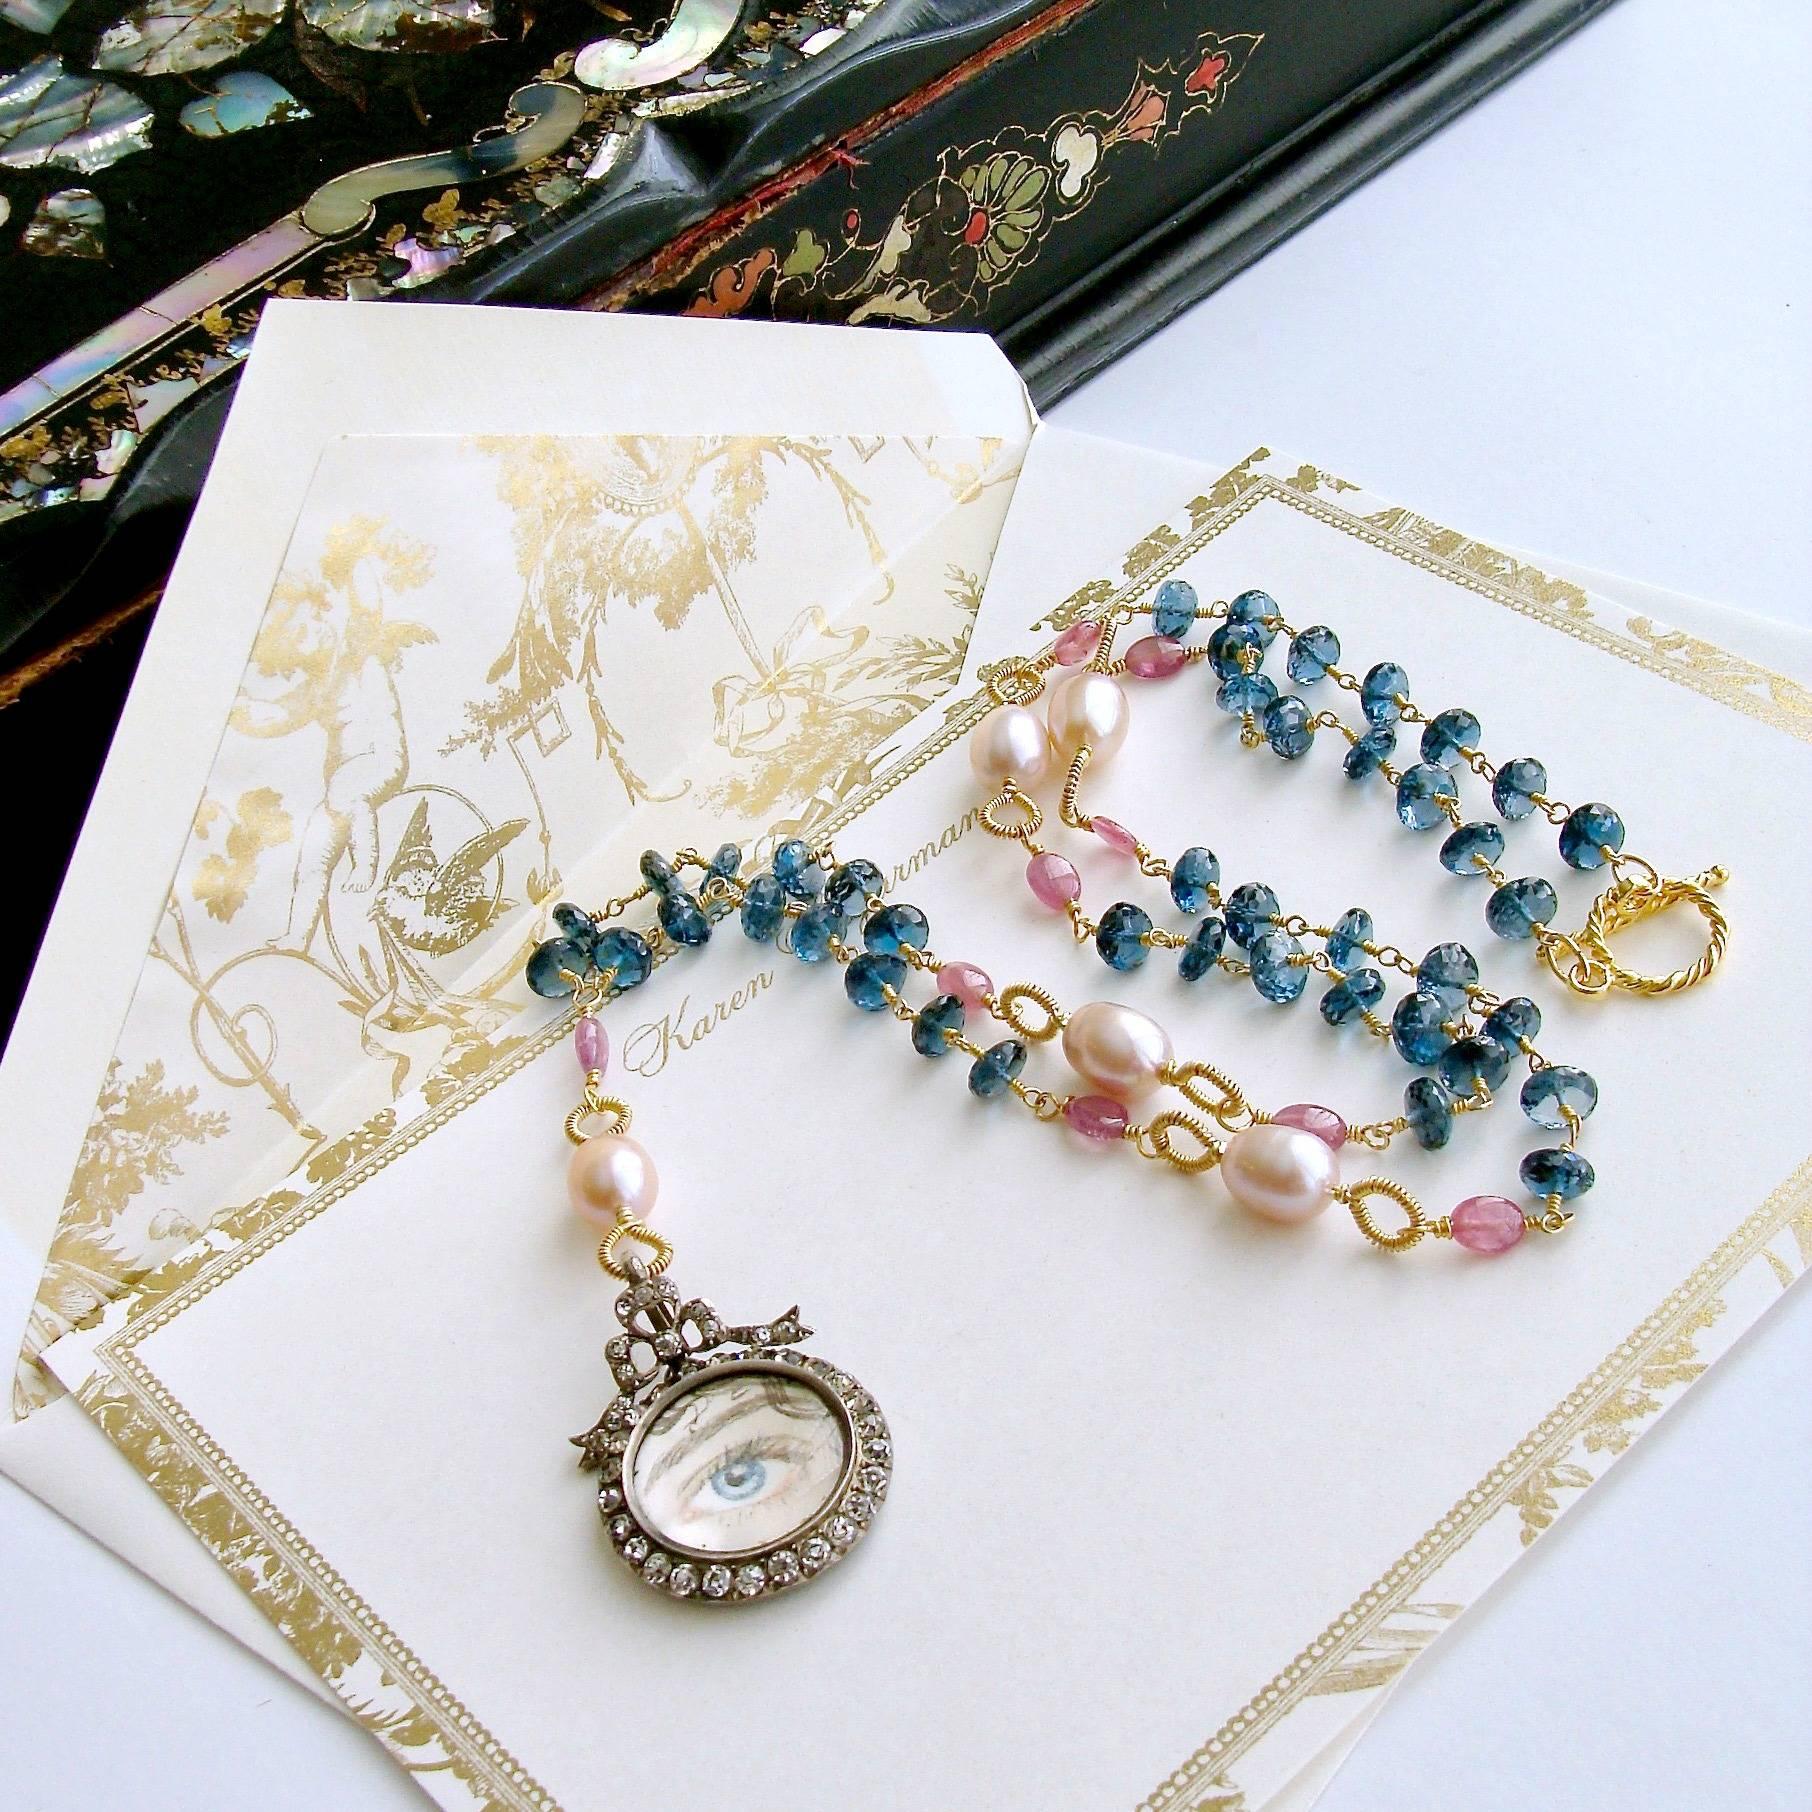 Veronica Necklace.

An enchanting hand-painted watercolor of a miniature Lover’s Eye was recently commissioned to marry the charming folklore of it’s antique counterparts with a gorgeous Edwardian antique silver paste locket.  The stunning and